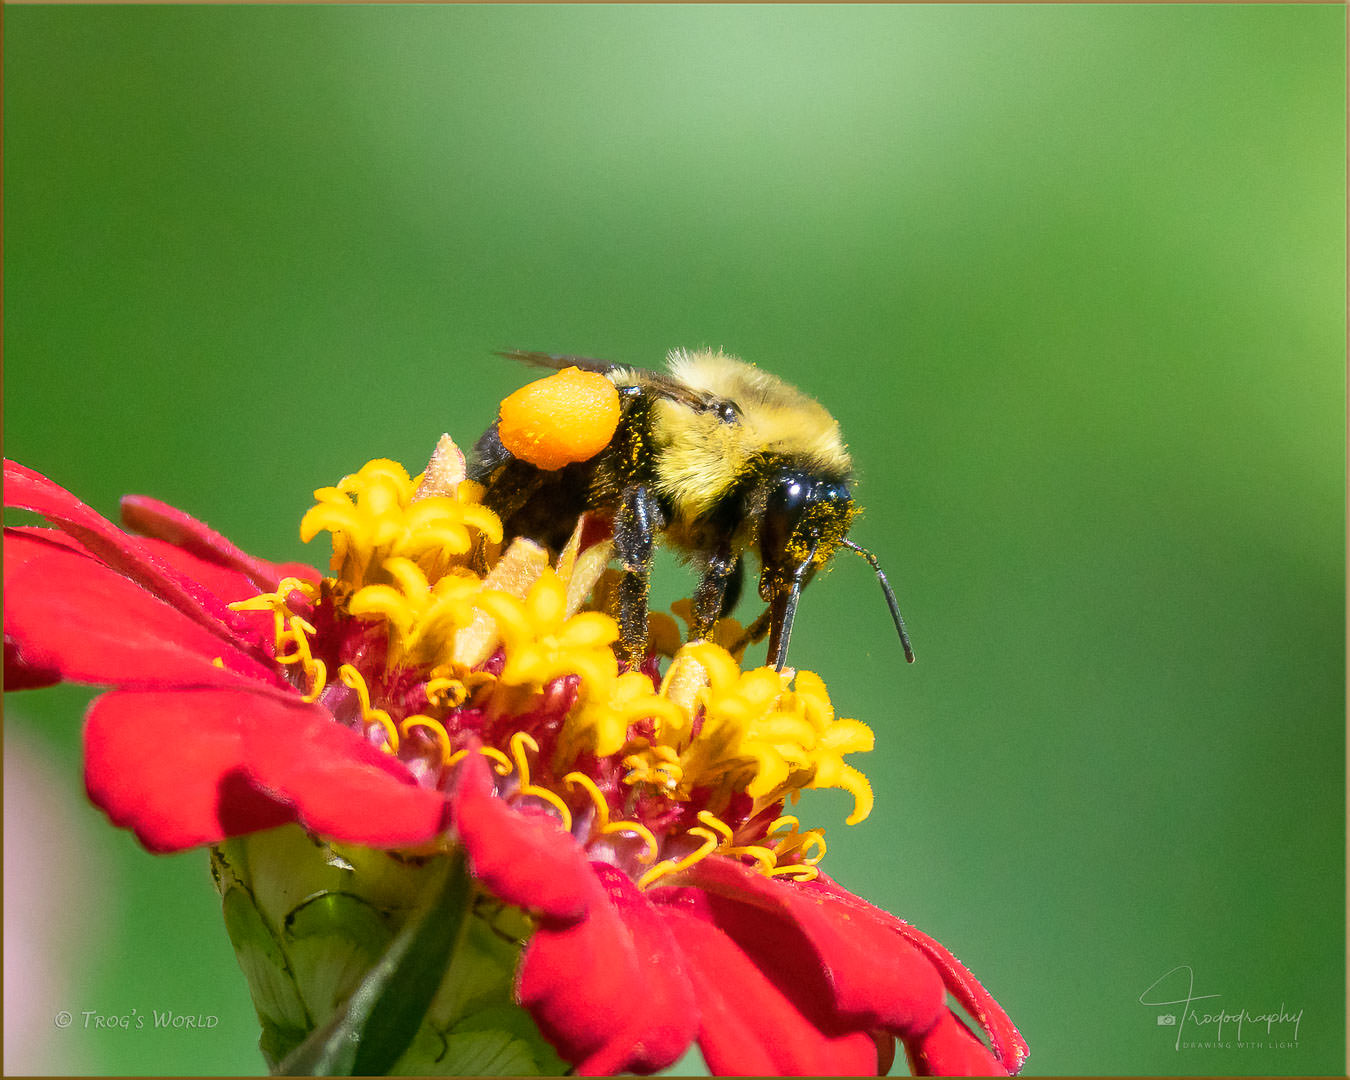 Bumblebee on a flower with a pollen sac